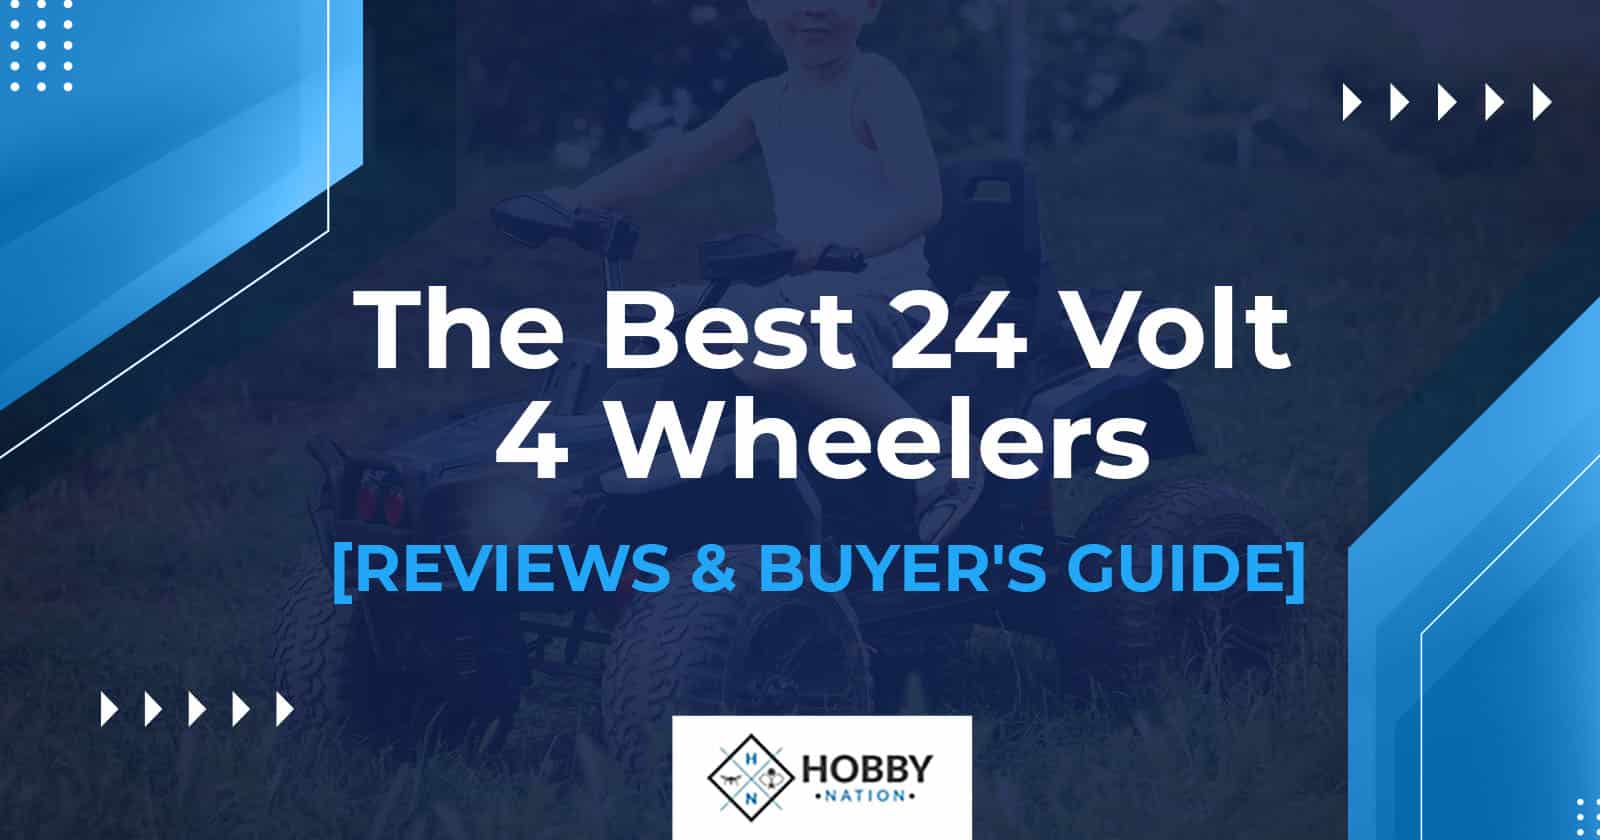 The Best 24 Volt 4 Wheelers [REVIEWS & BUYER’S GUIDE]